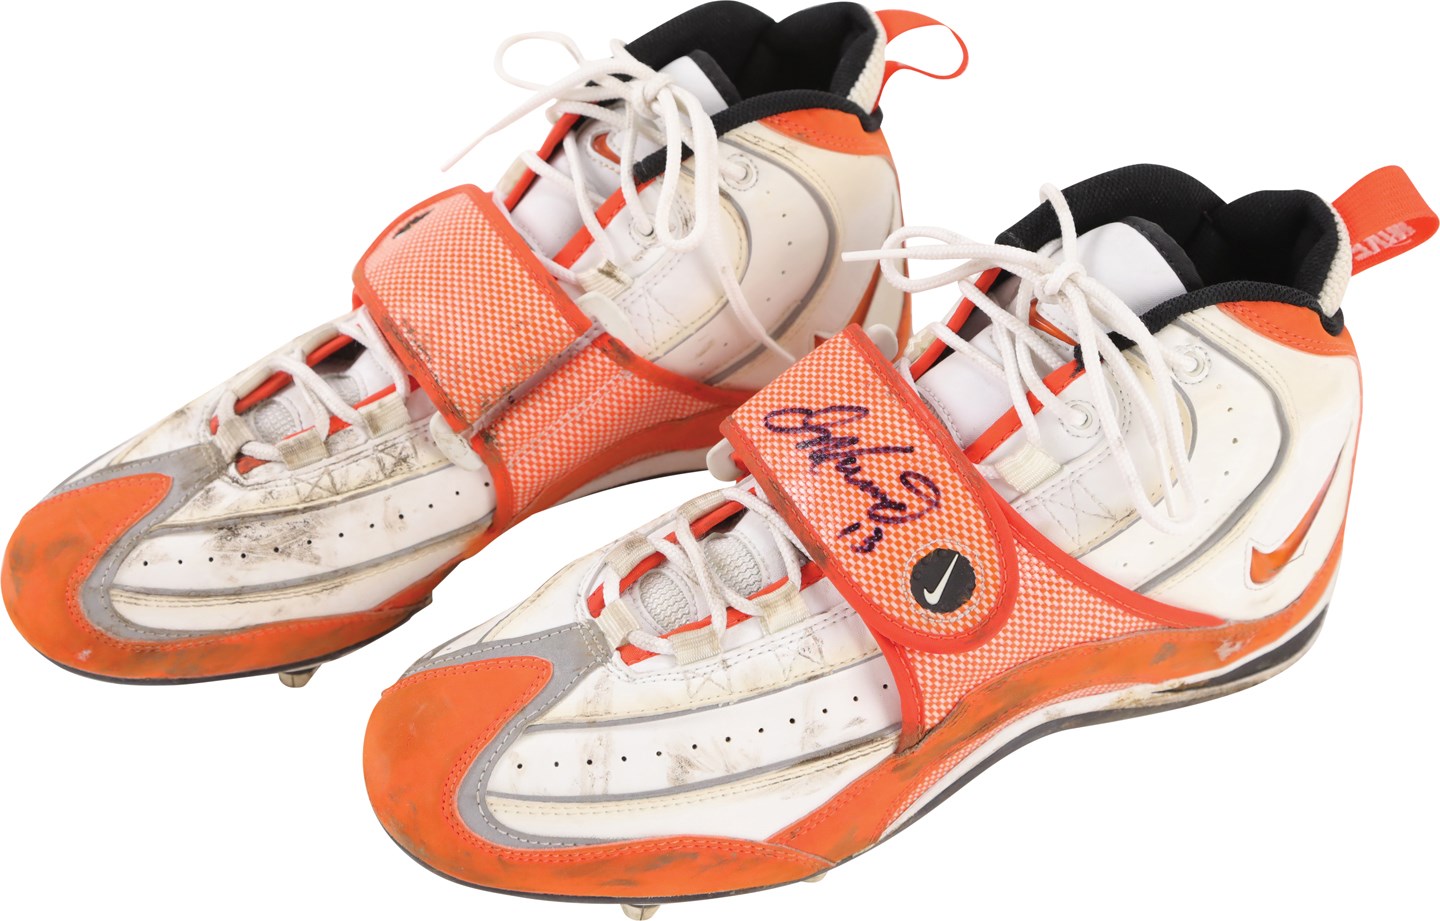 Dan Marino Miami Dolphins Signed Game Worn Cleats (PSA)